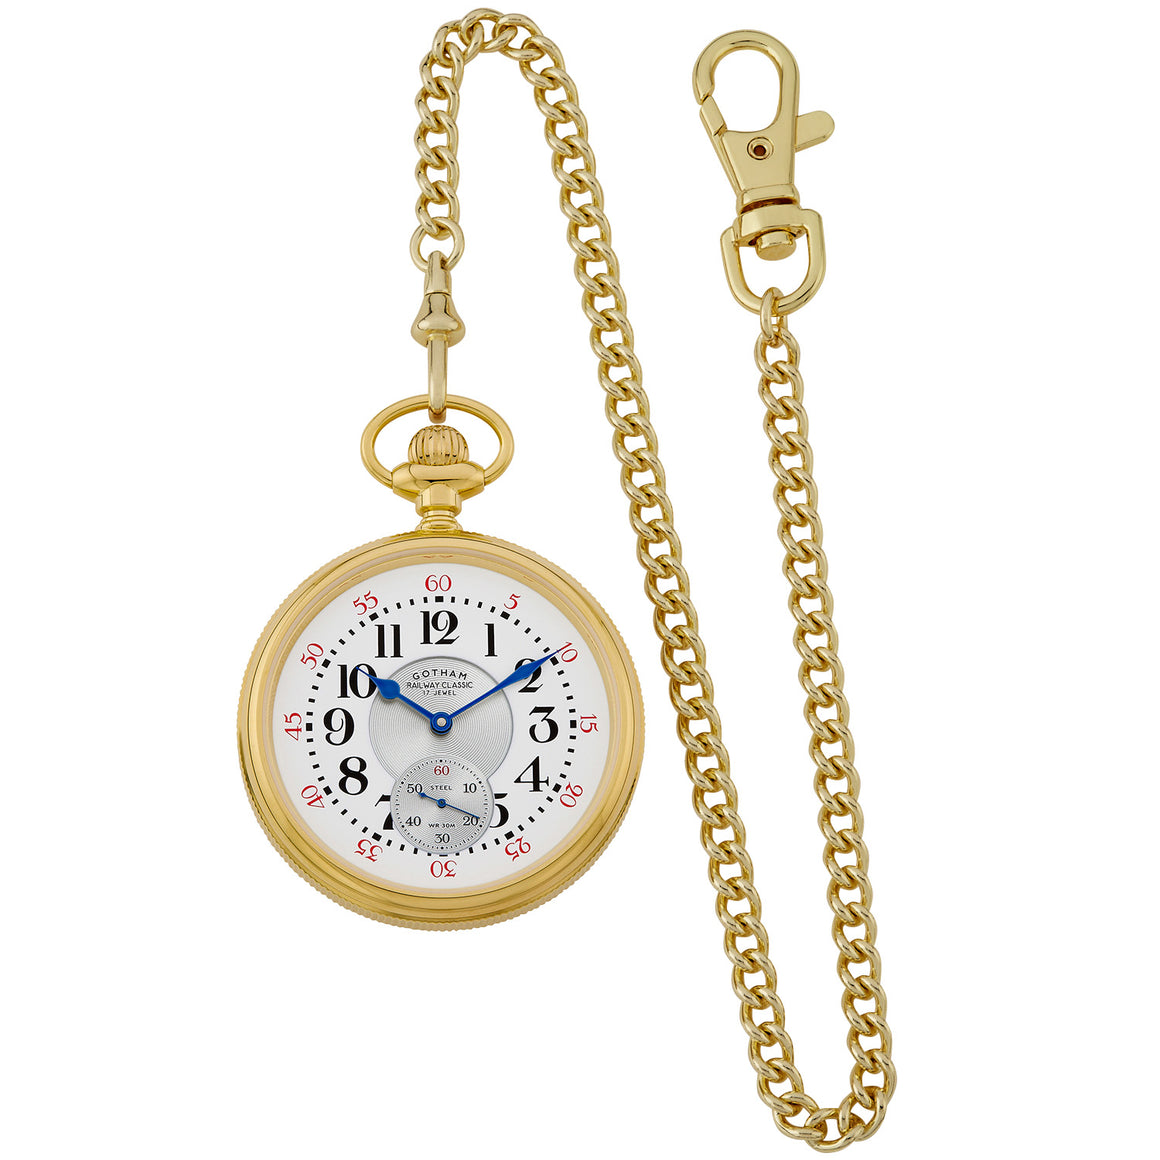 Gotham Men's Gold Plated Stainless Steel Mechanical Hand Wind Railway Classic Nostalgia Series Pocket Watch # GWC14117G